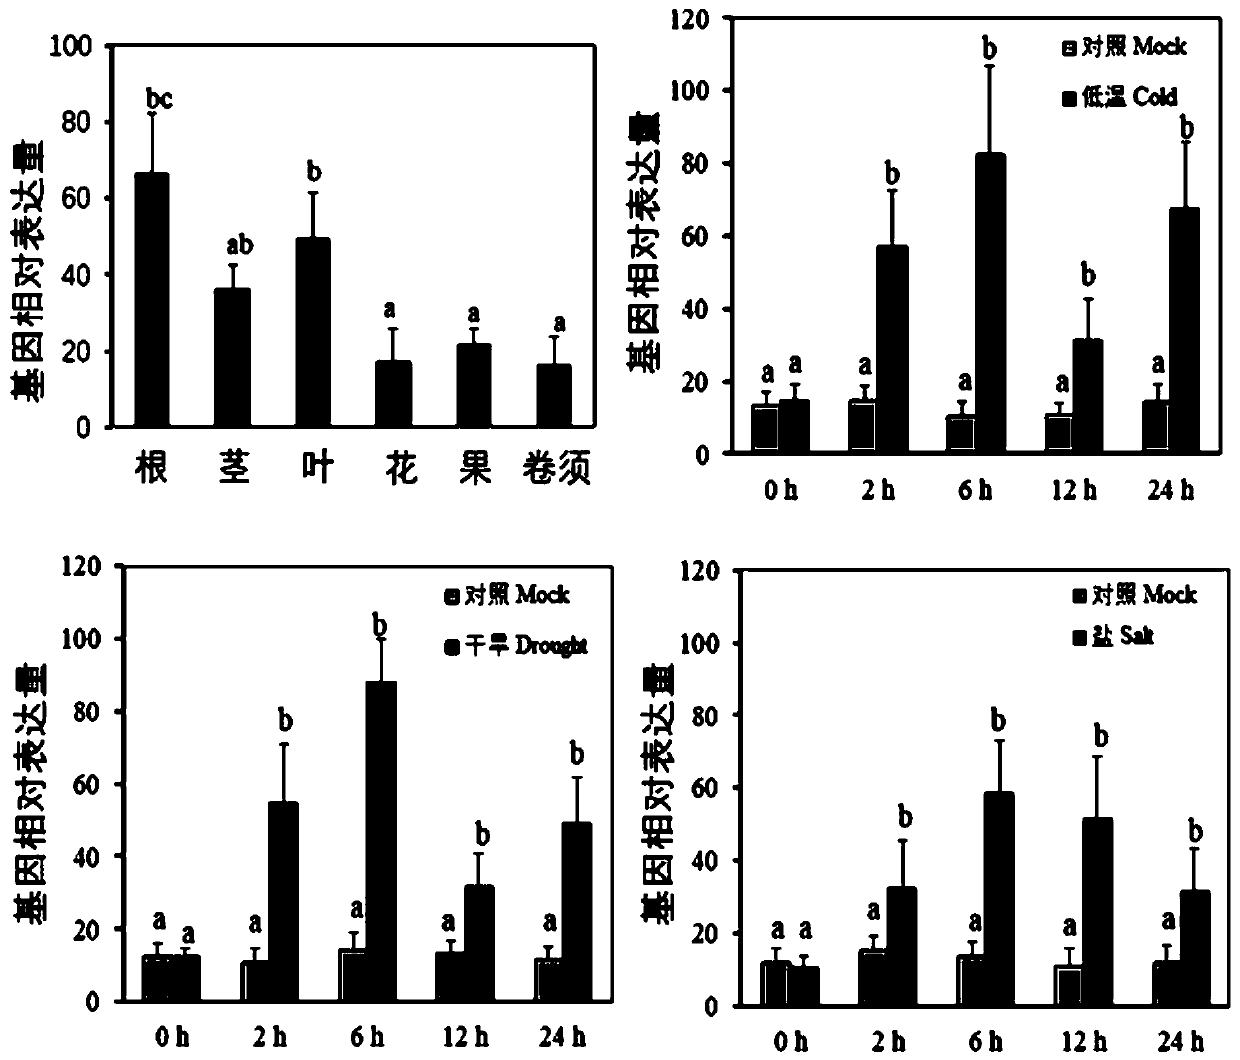 Grape VyCYP89A2 gene and encoding protein thereof as well as application of grape VyCYP89A2 gene in drought-resistant variety breeding